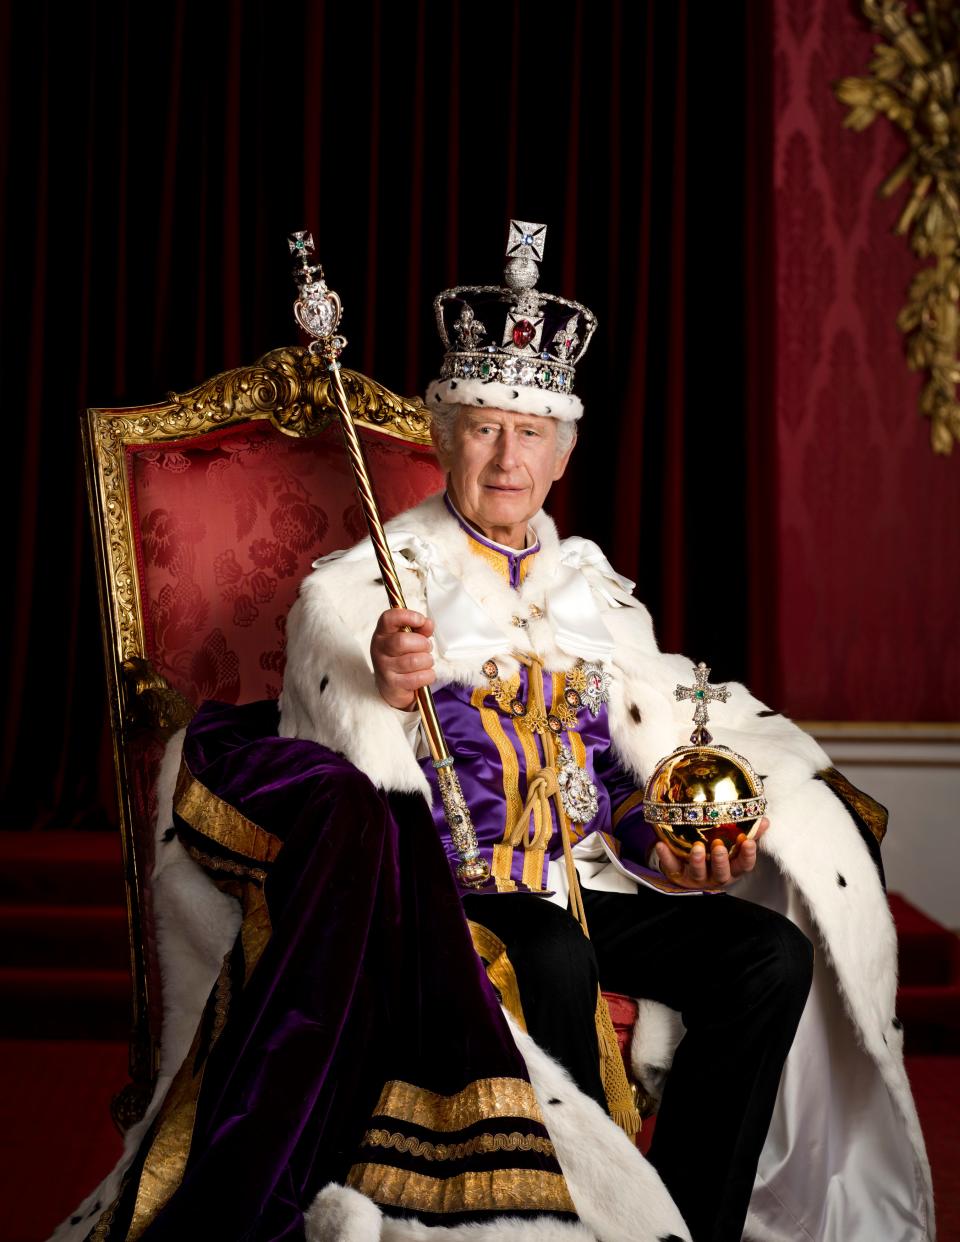 King Charles' first official portrait as monarch